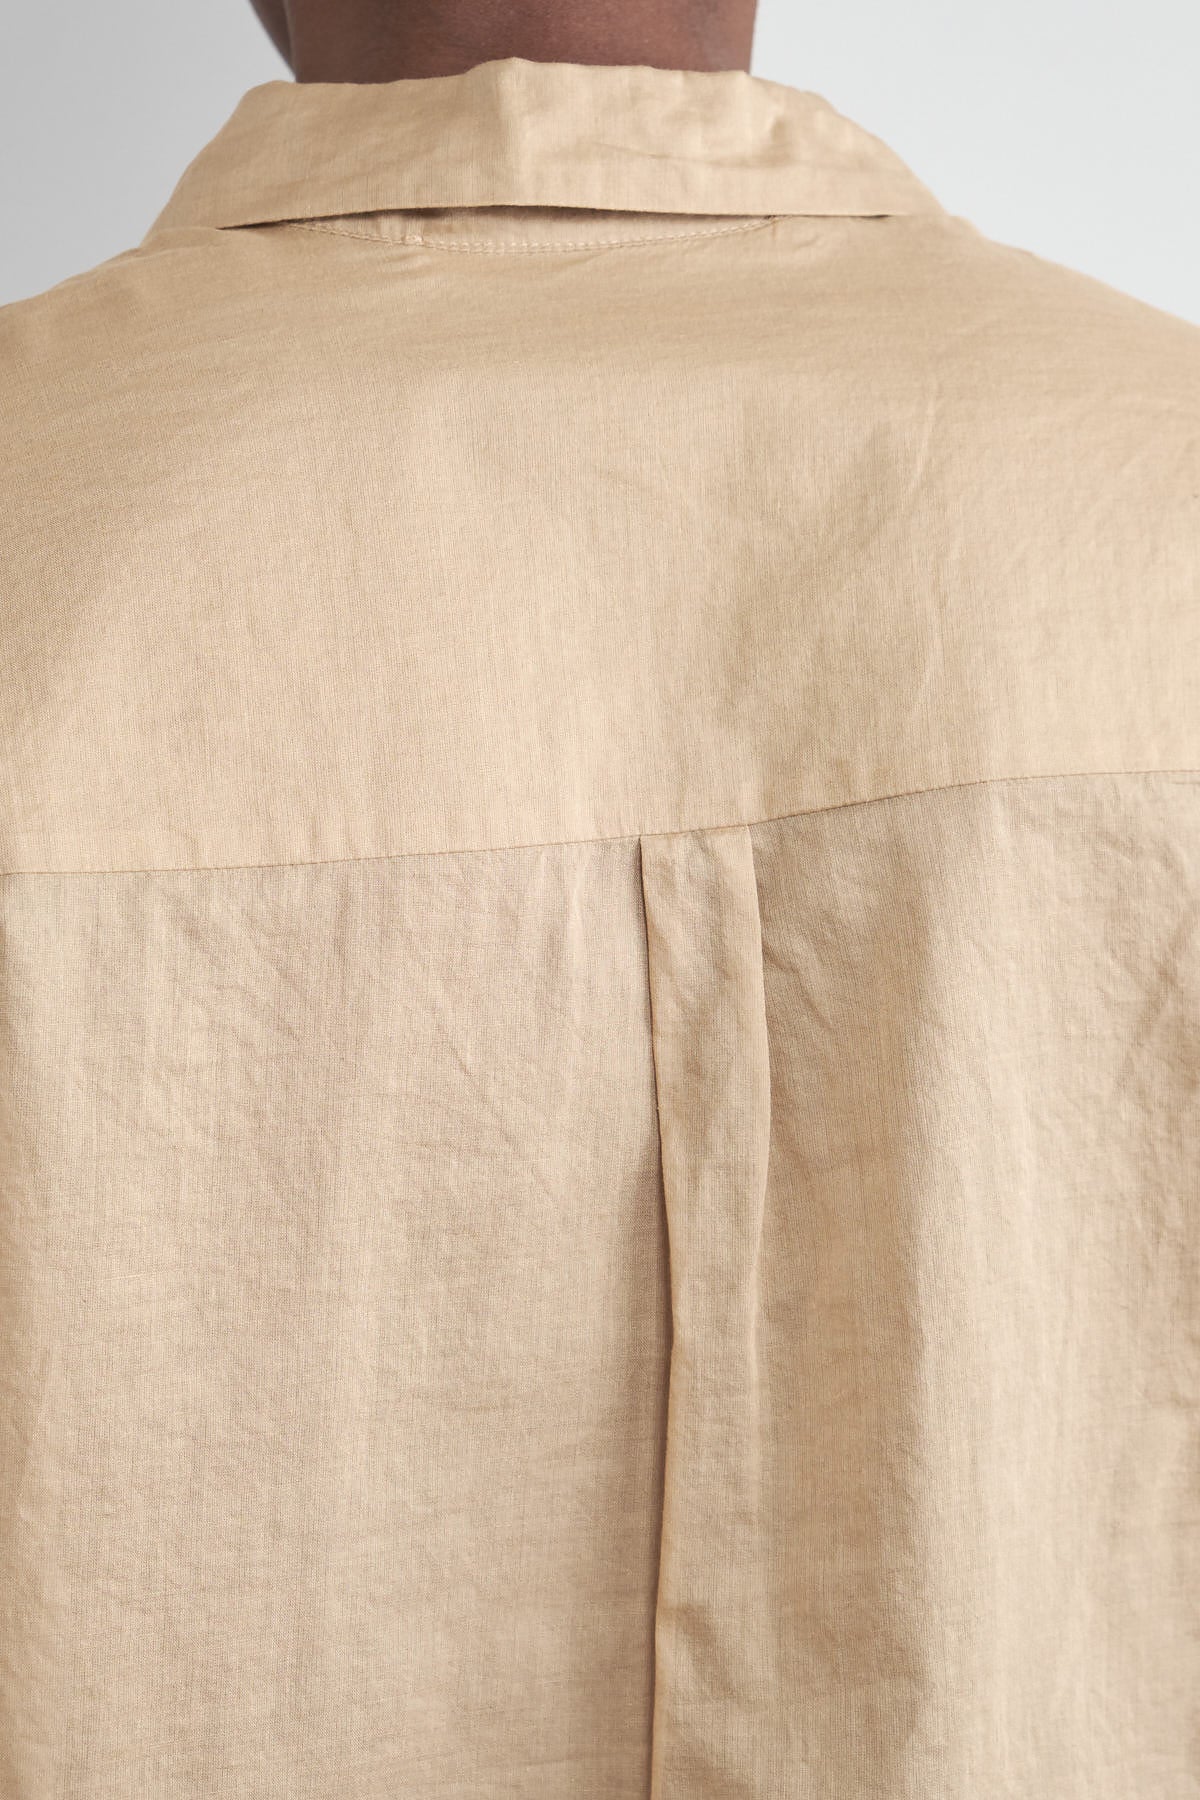 Back detailing on Illusion Shirt in Camel